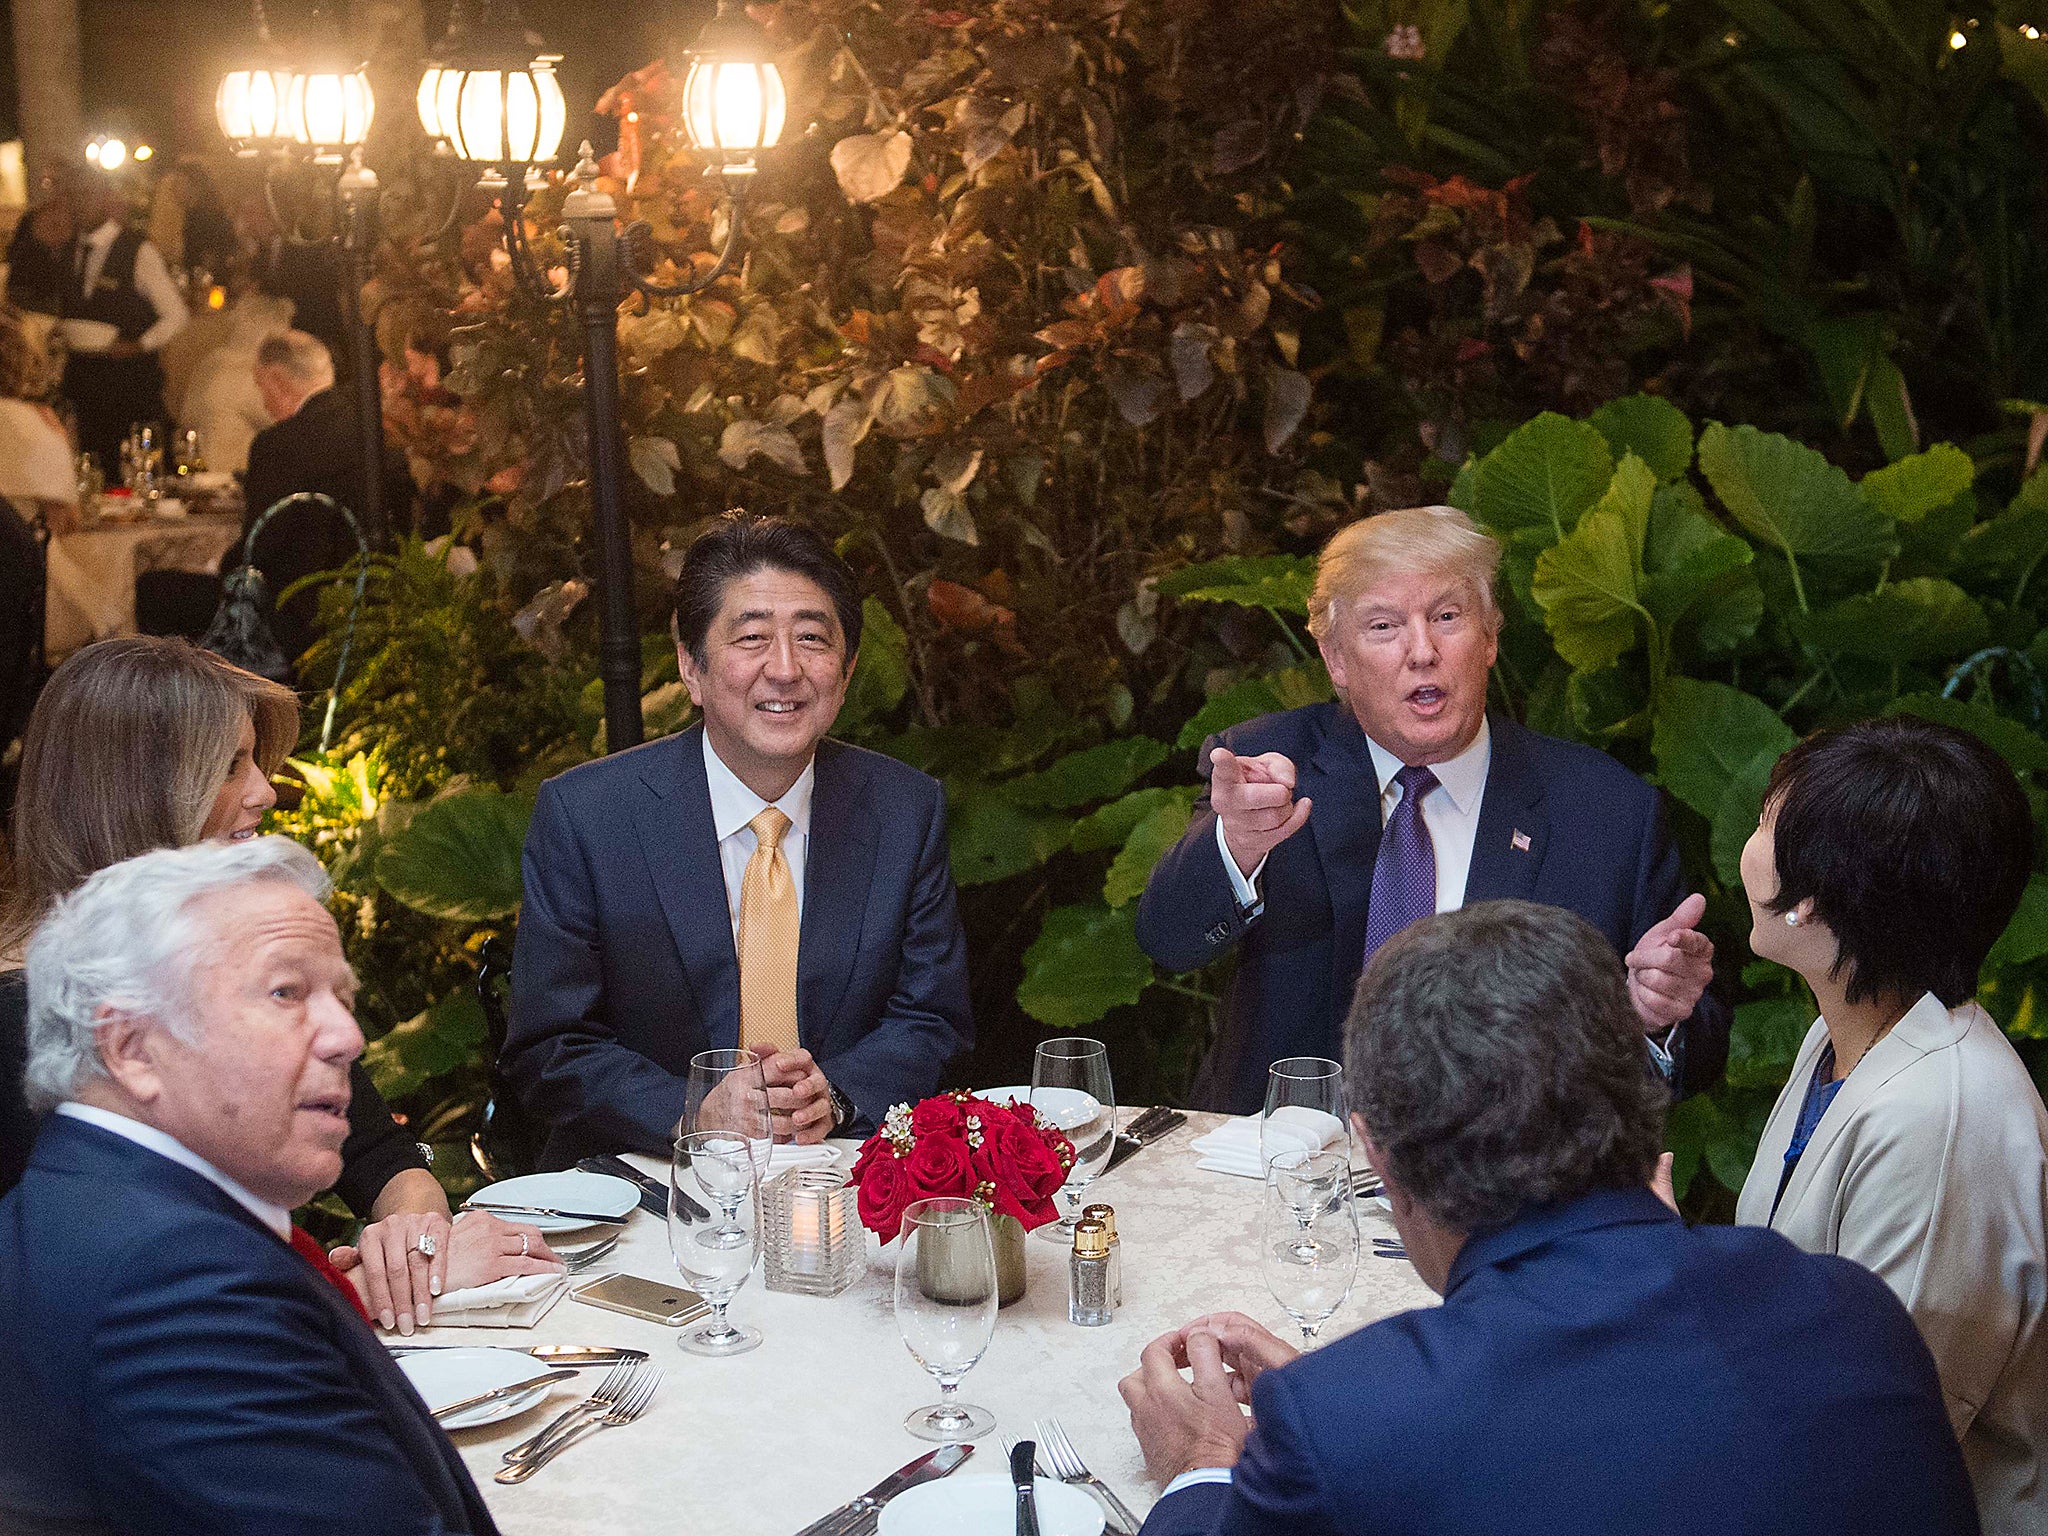 Donald Trump hosted Shinzo Abe, the Japanese Prime Minister, at his Mar-a-Lago club. The pair were pictured discussing how to respond to North Korea's latest missile test.